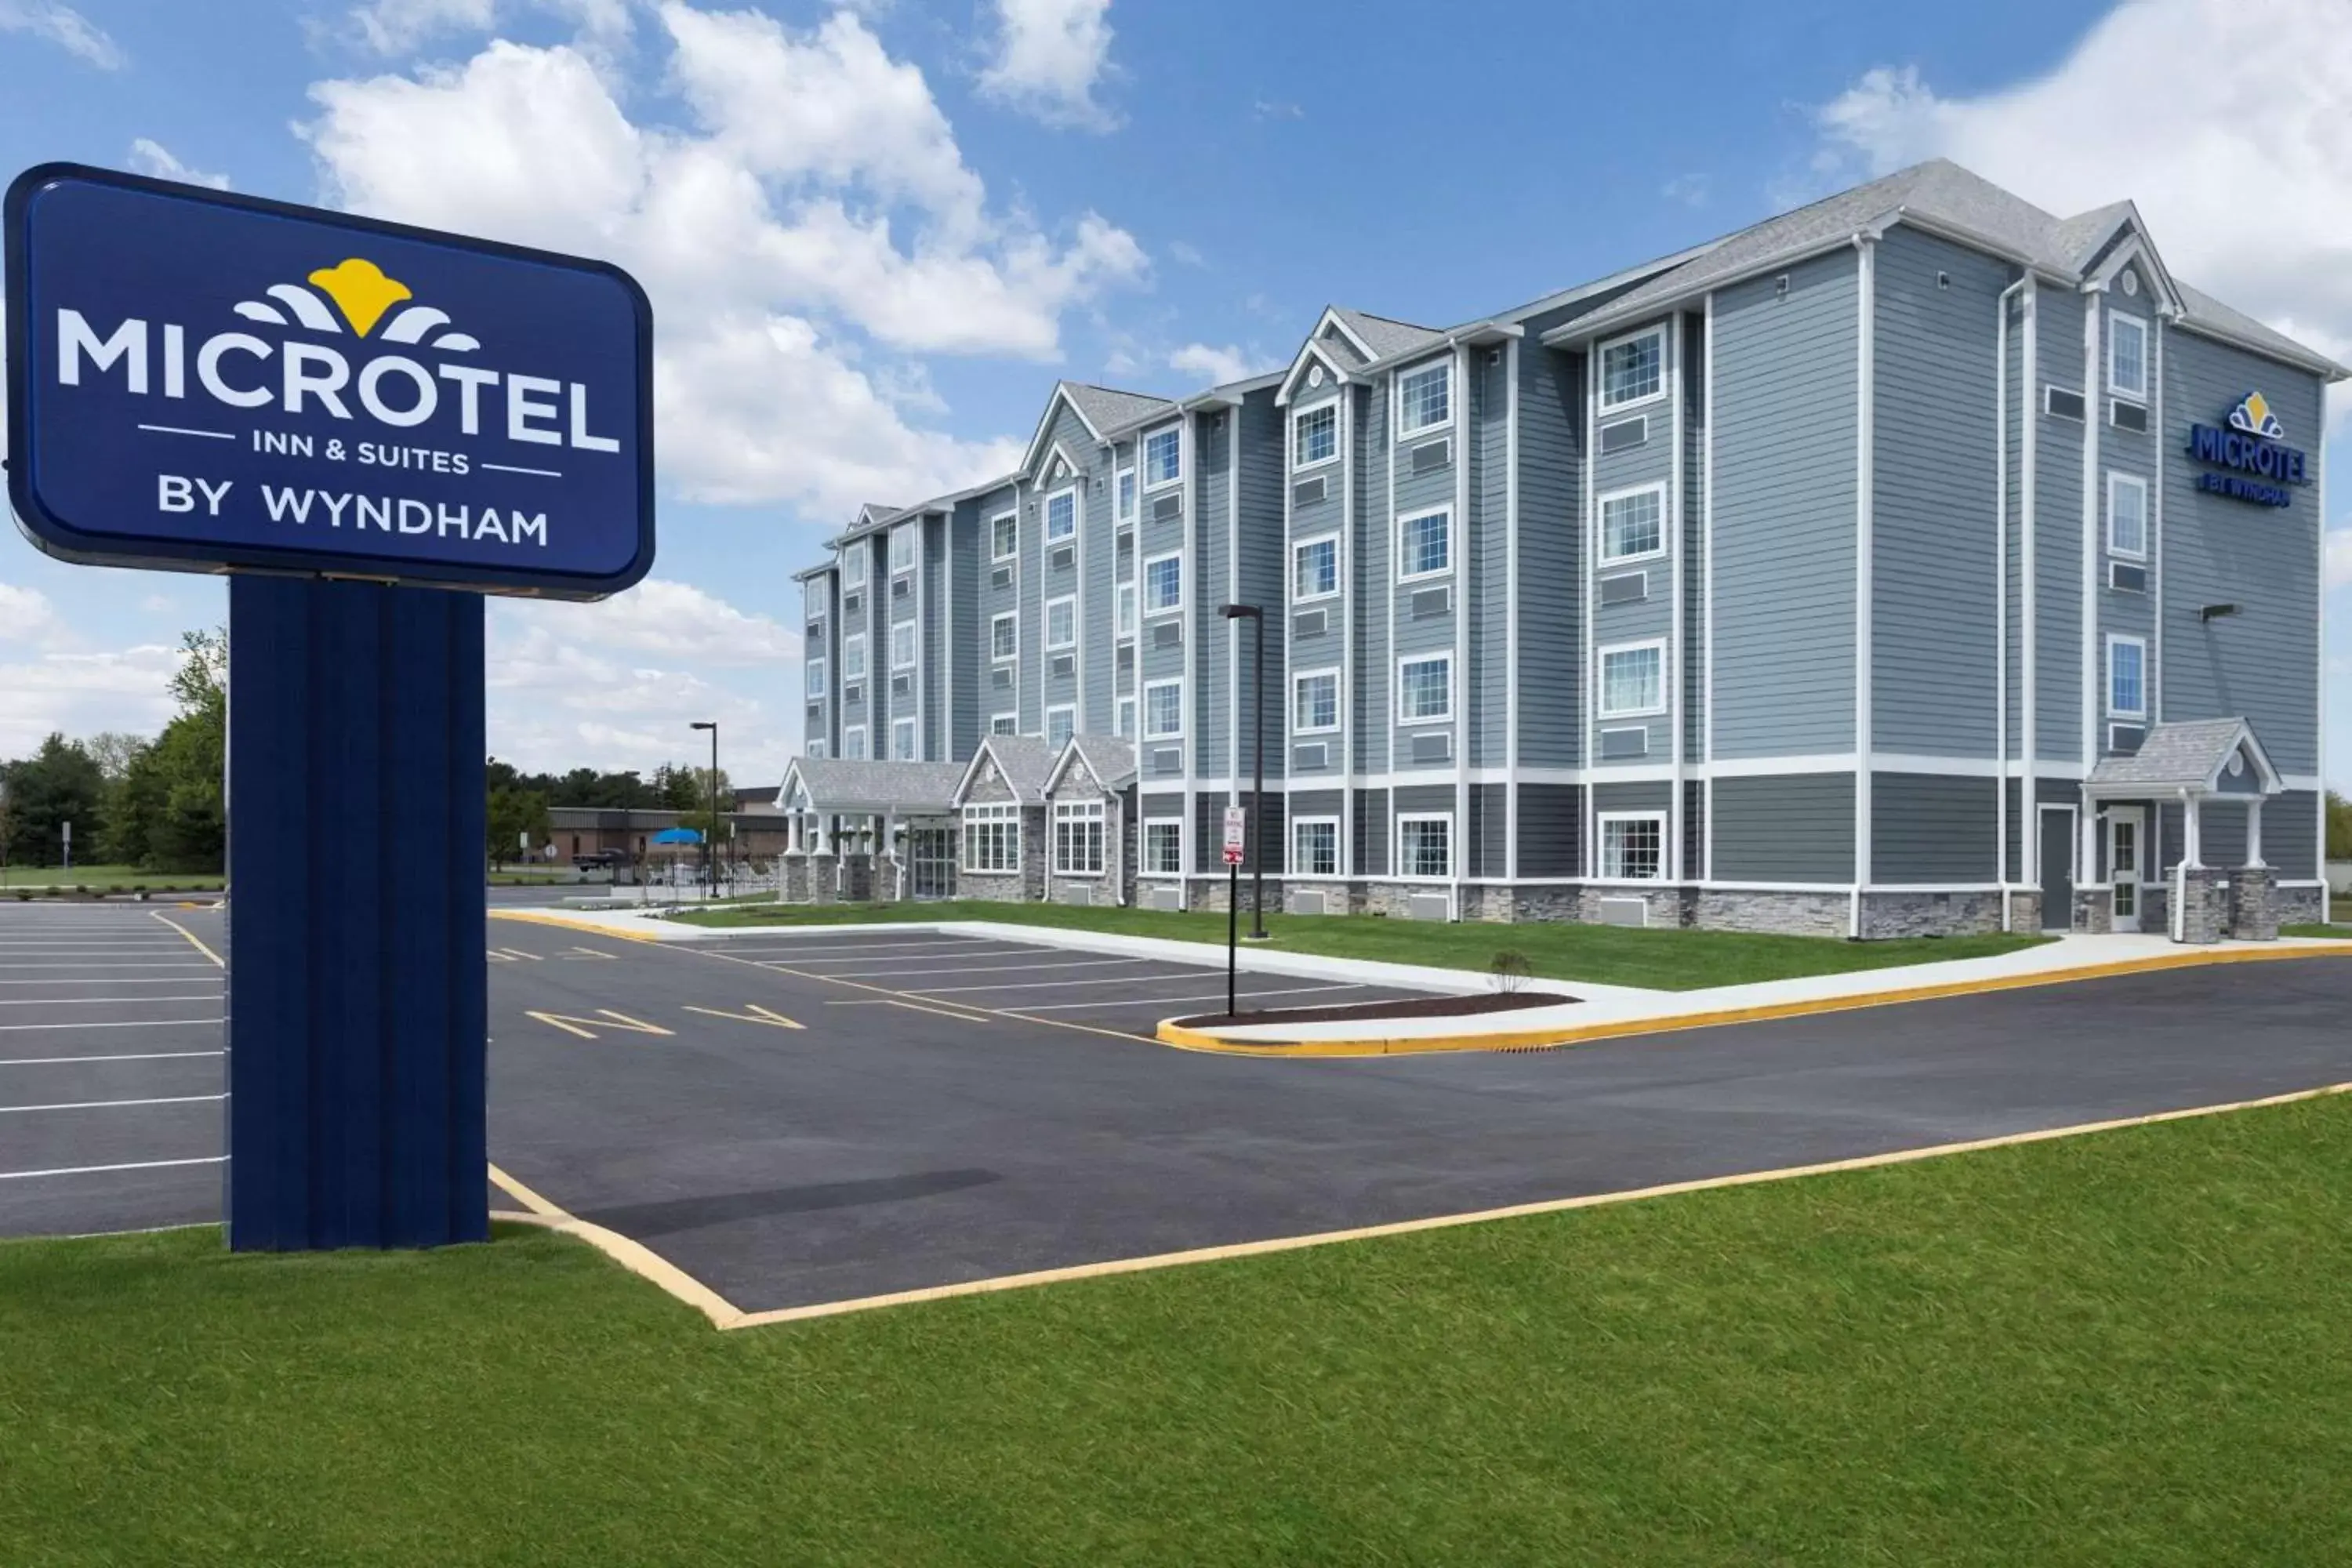 Property building in Microtel Inn & Suites by Wyndham Georgetown Delaware Beaches